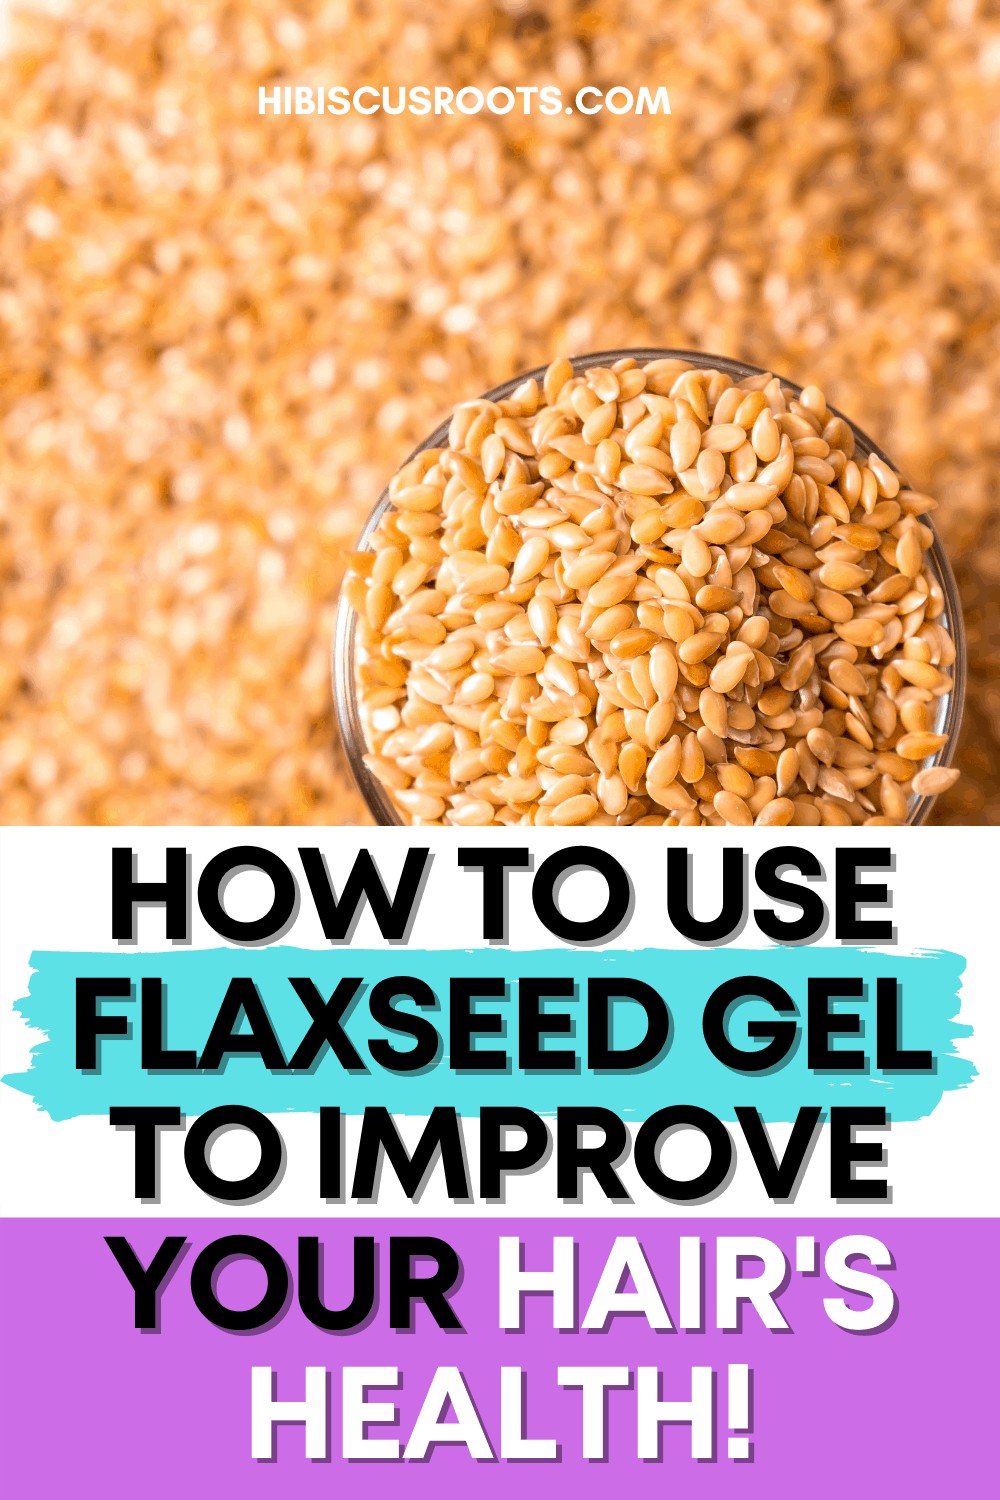 Easy Flaxseed Gel Recipe for Natural Hair - 10 min tops!